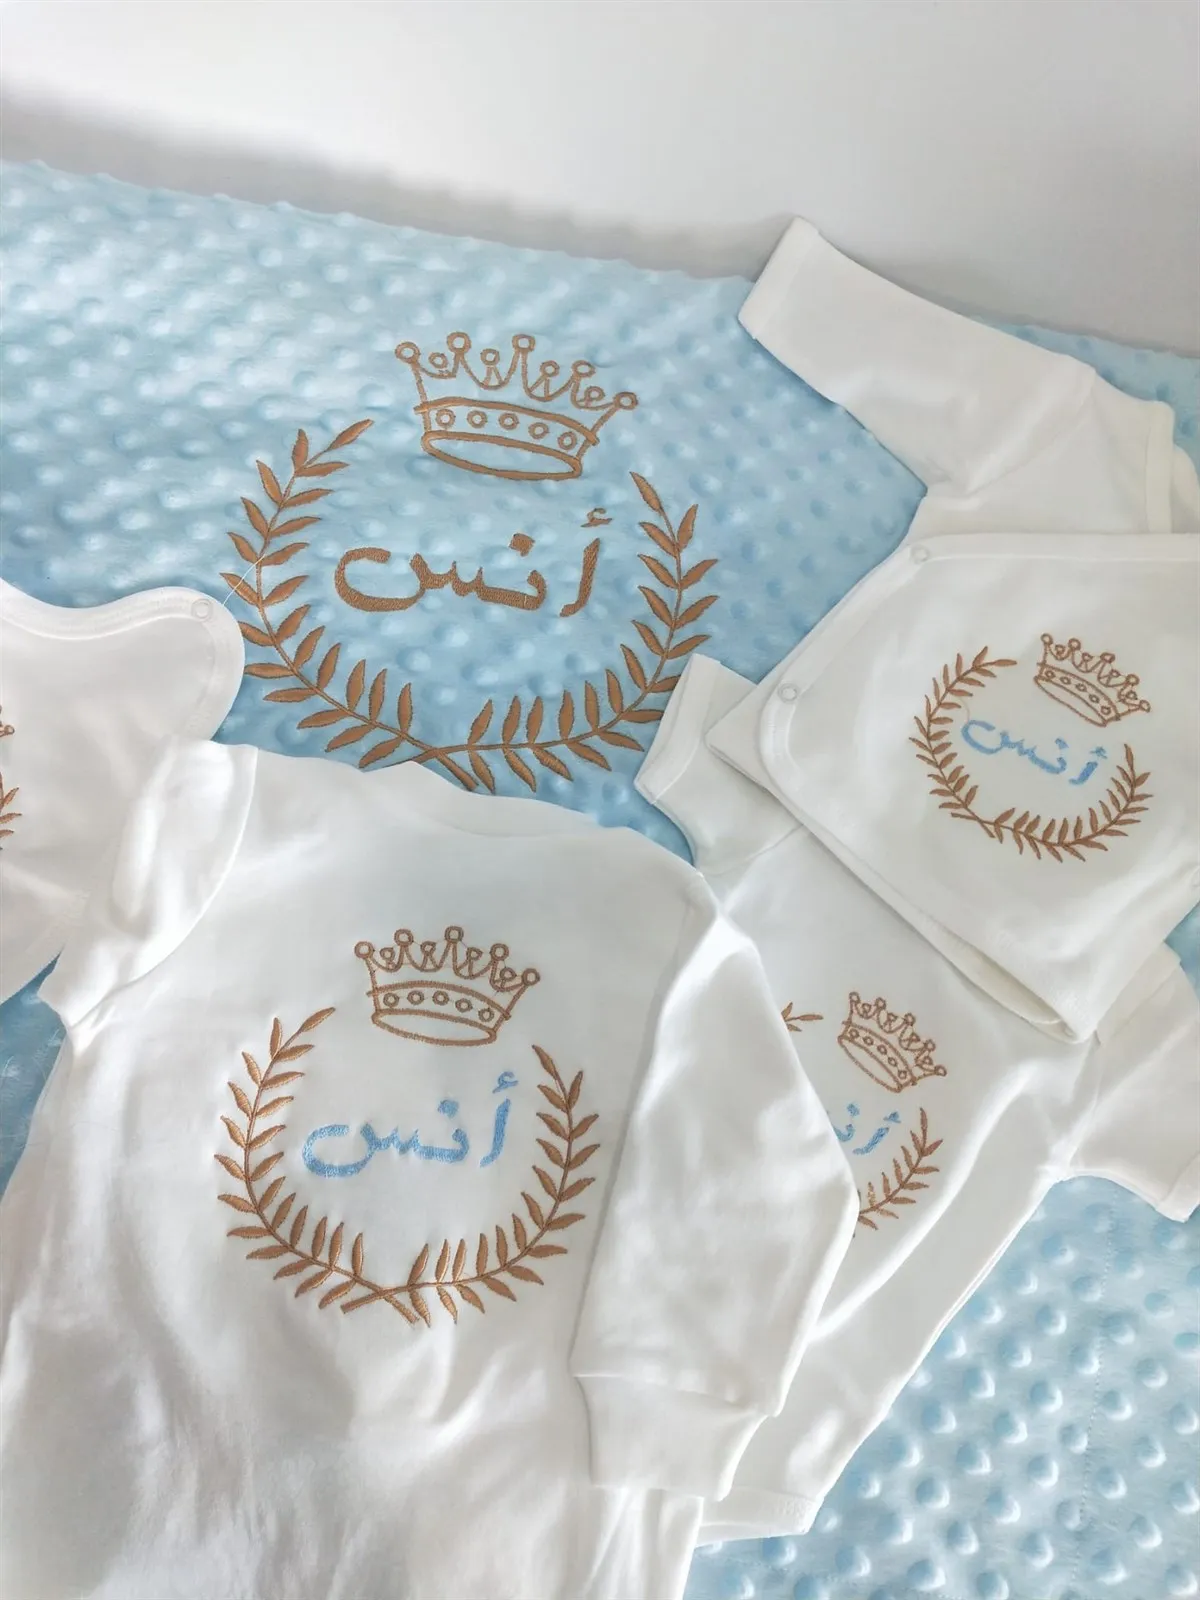 Jaju Baby Crown Pattern Embroidered and Name Embroidered Baby Newborn Set